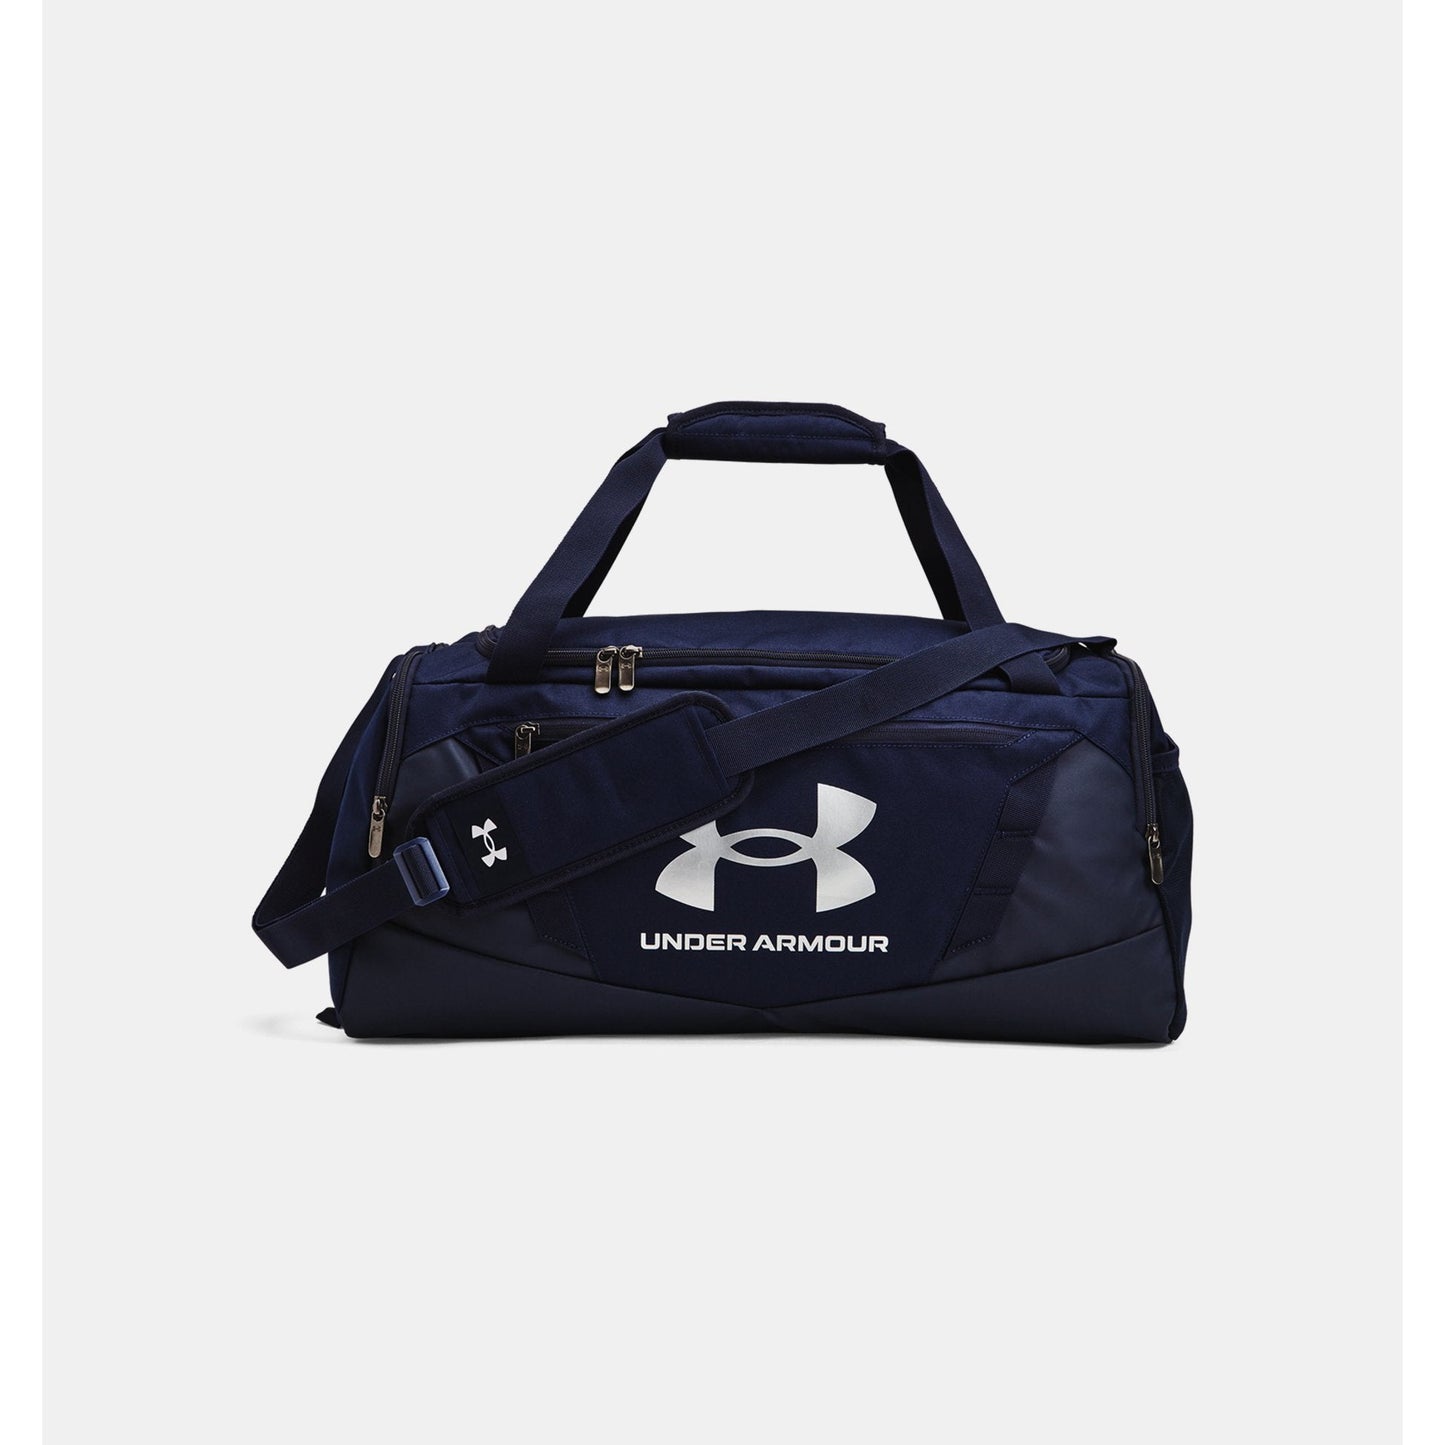 Under Armor Undeniable 5.0 Small Duffle Bag, Multiple Colors Available